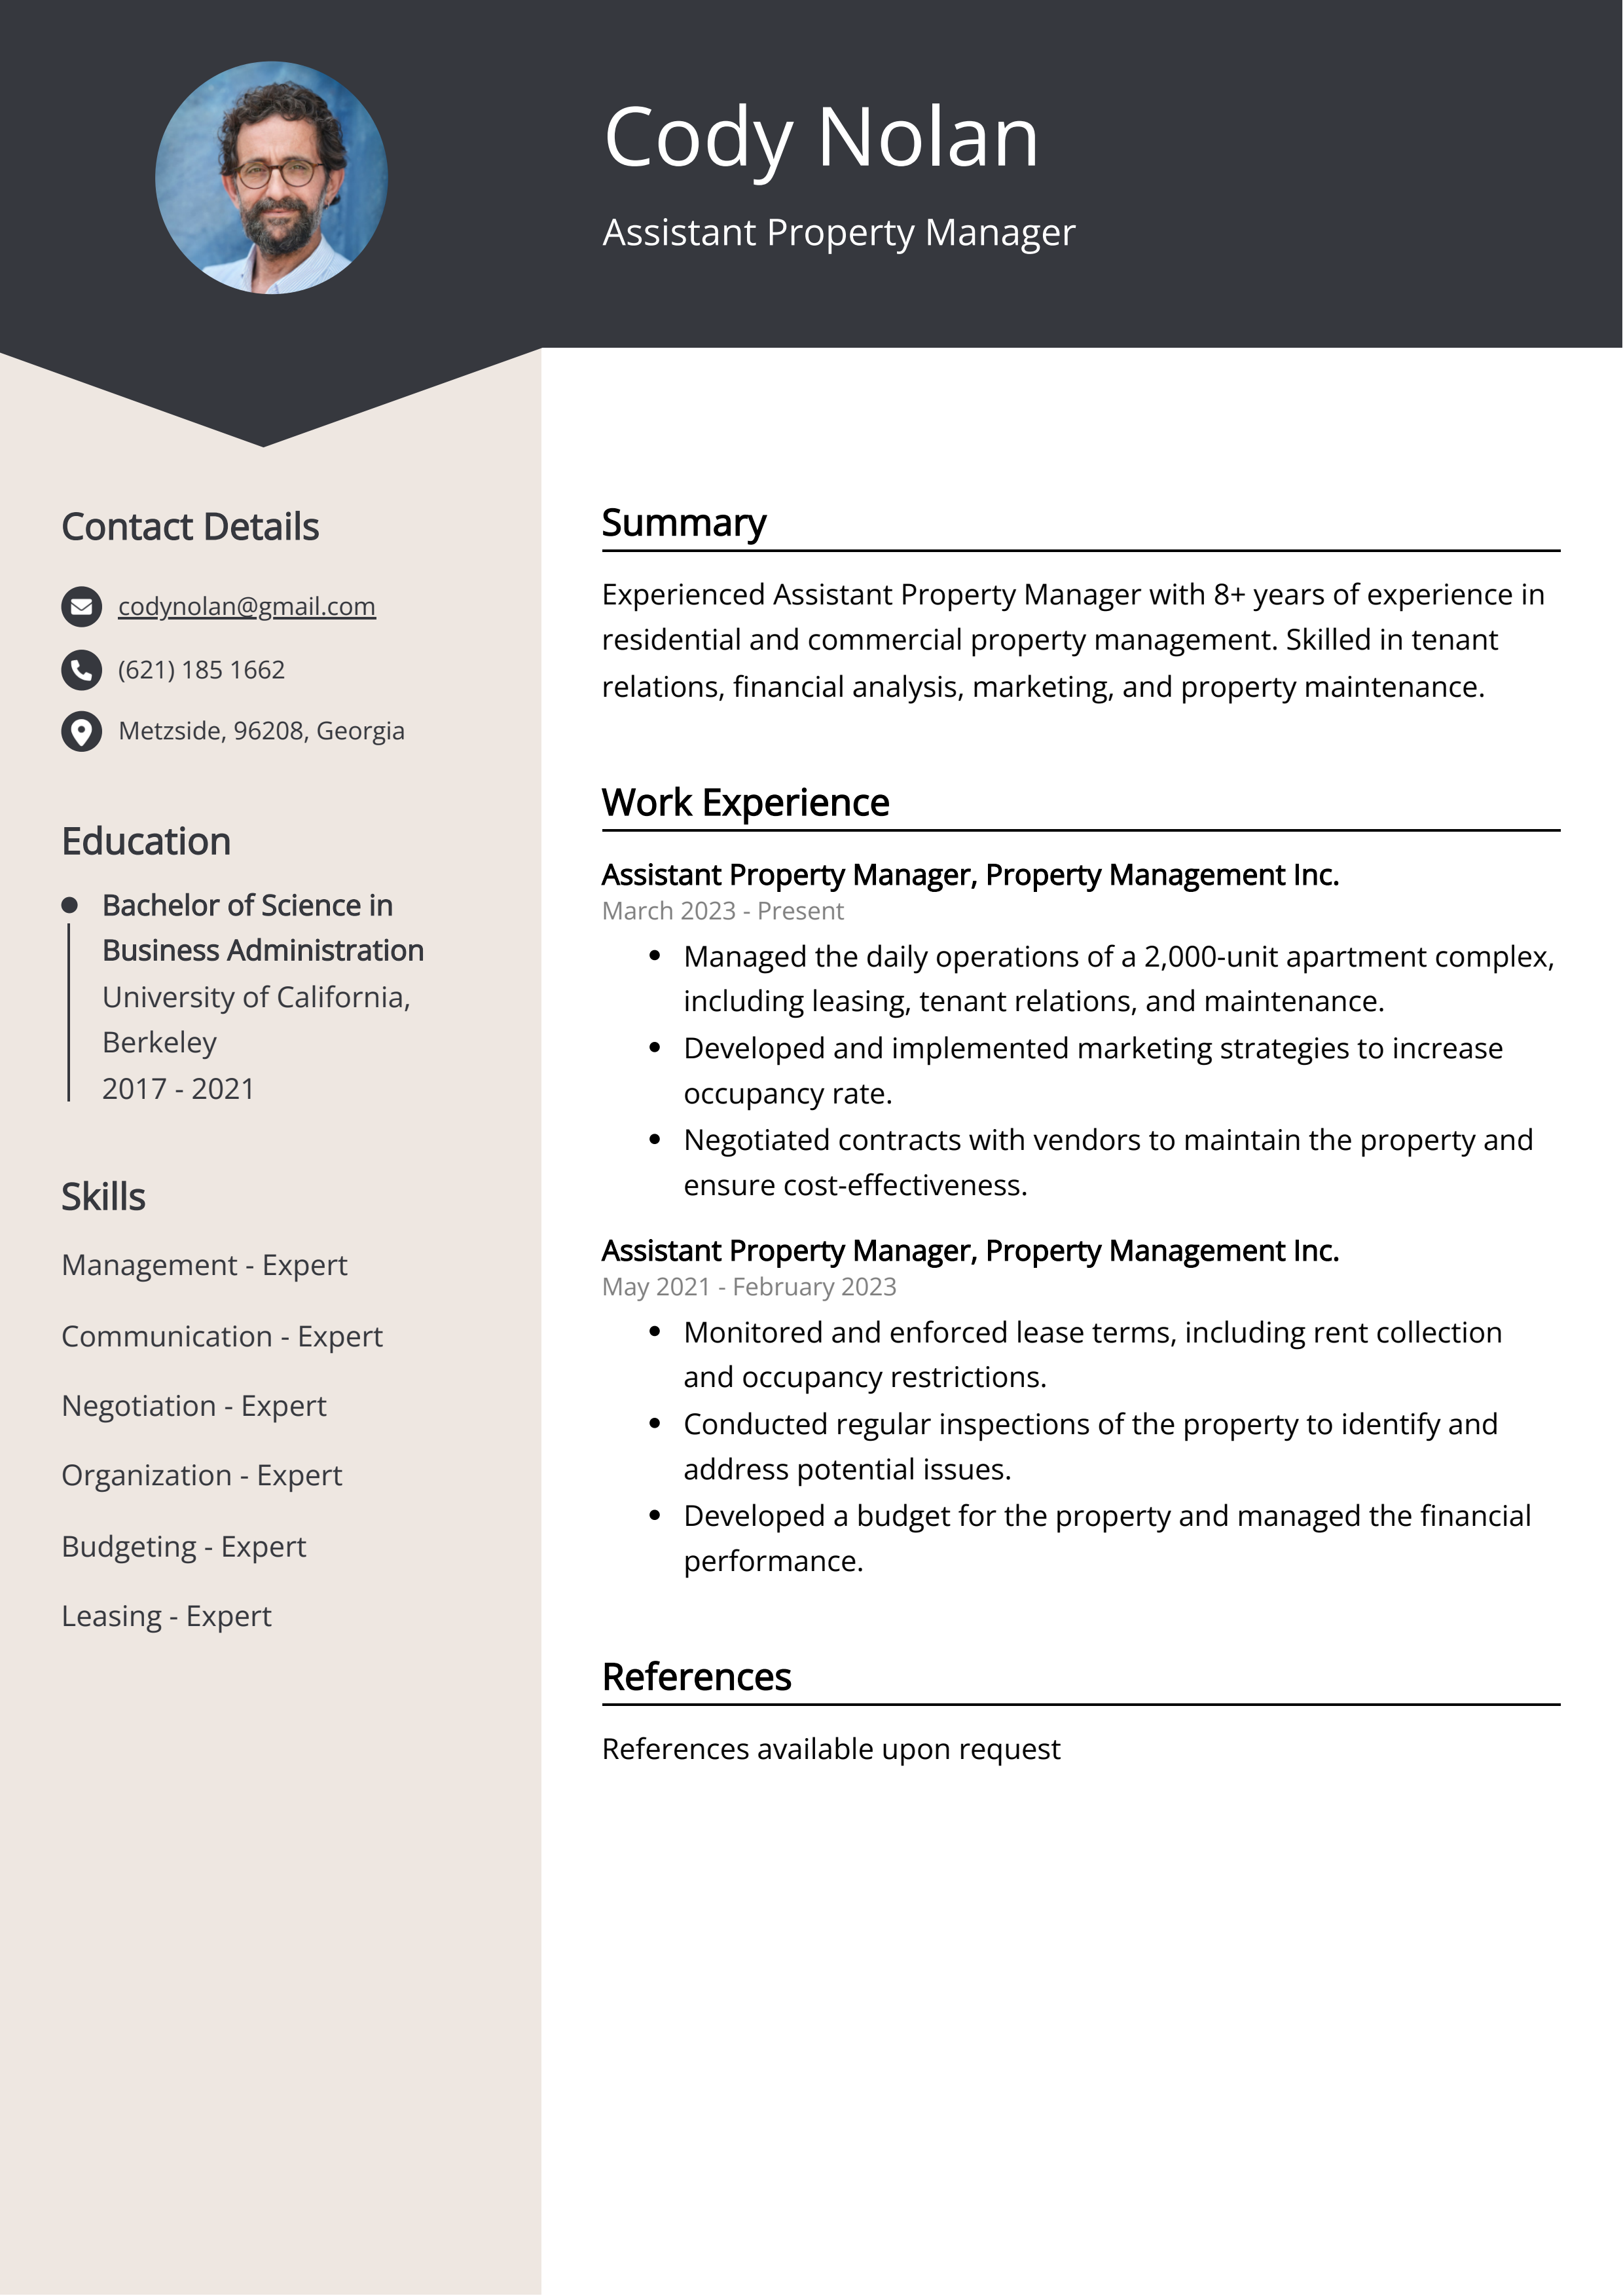 Assistant Property Manager CV Example